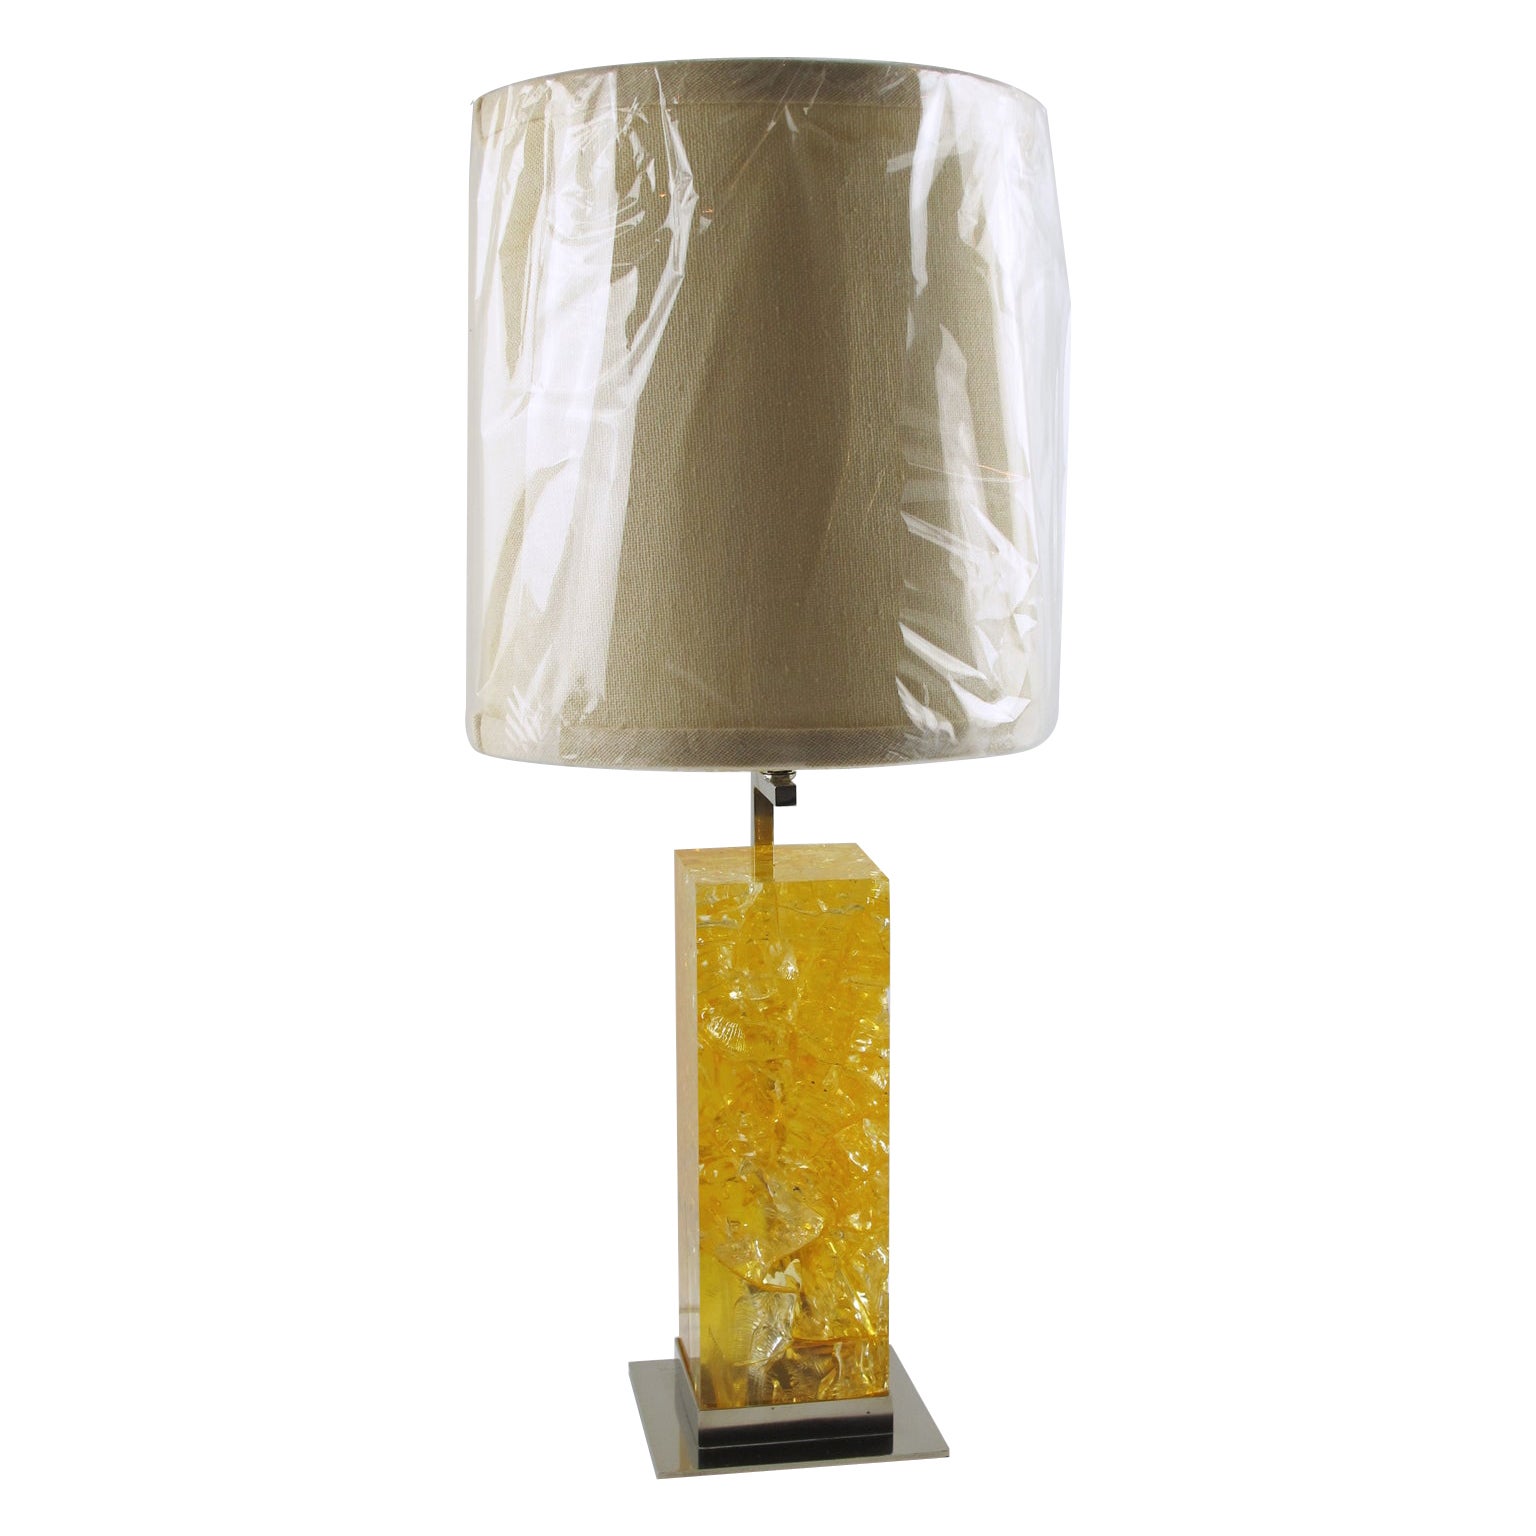 Marie-Claude de Fouquieres Yellow Fractal Resin and Chrome Table Lamp, 1970s For Sale